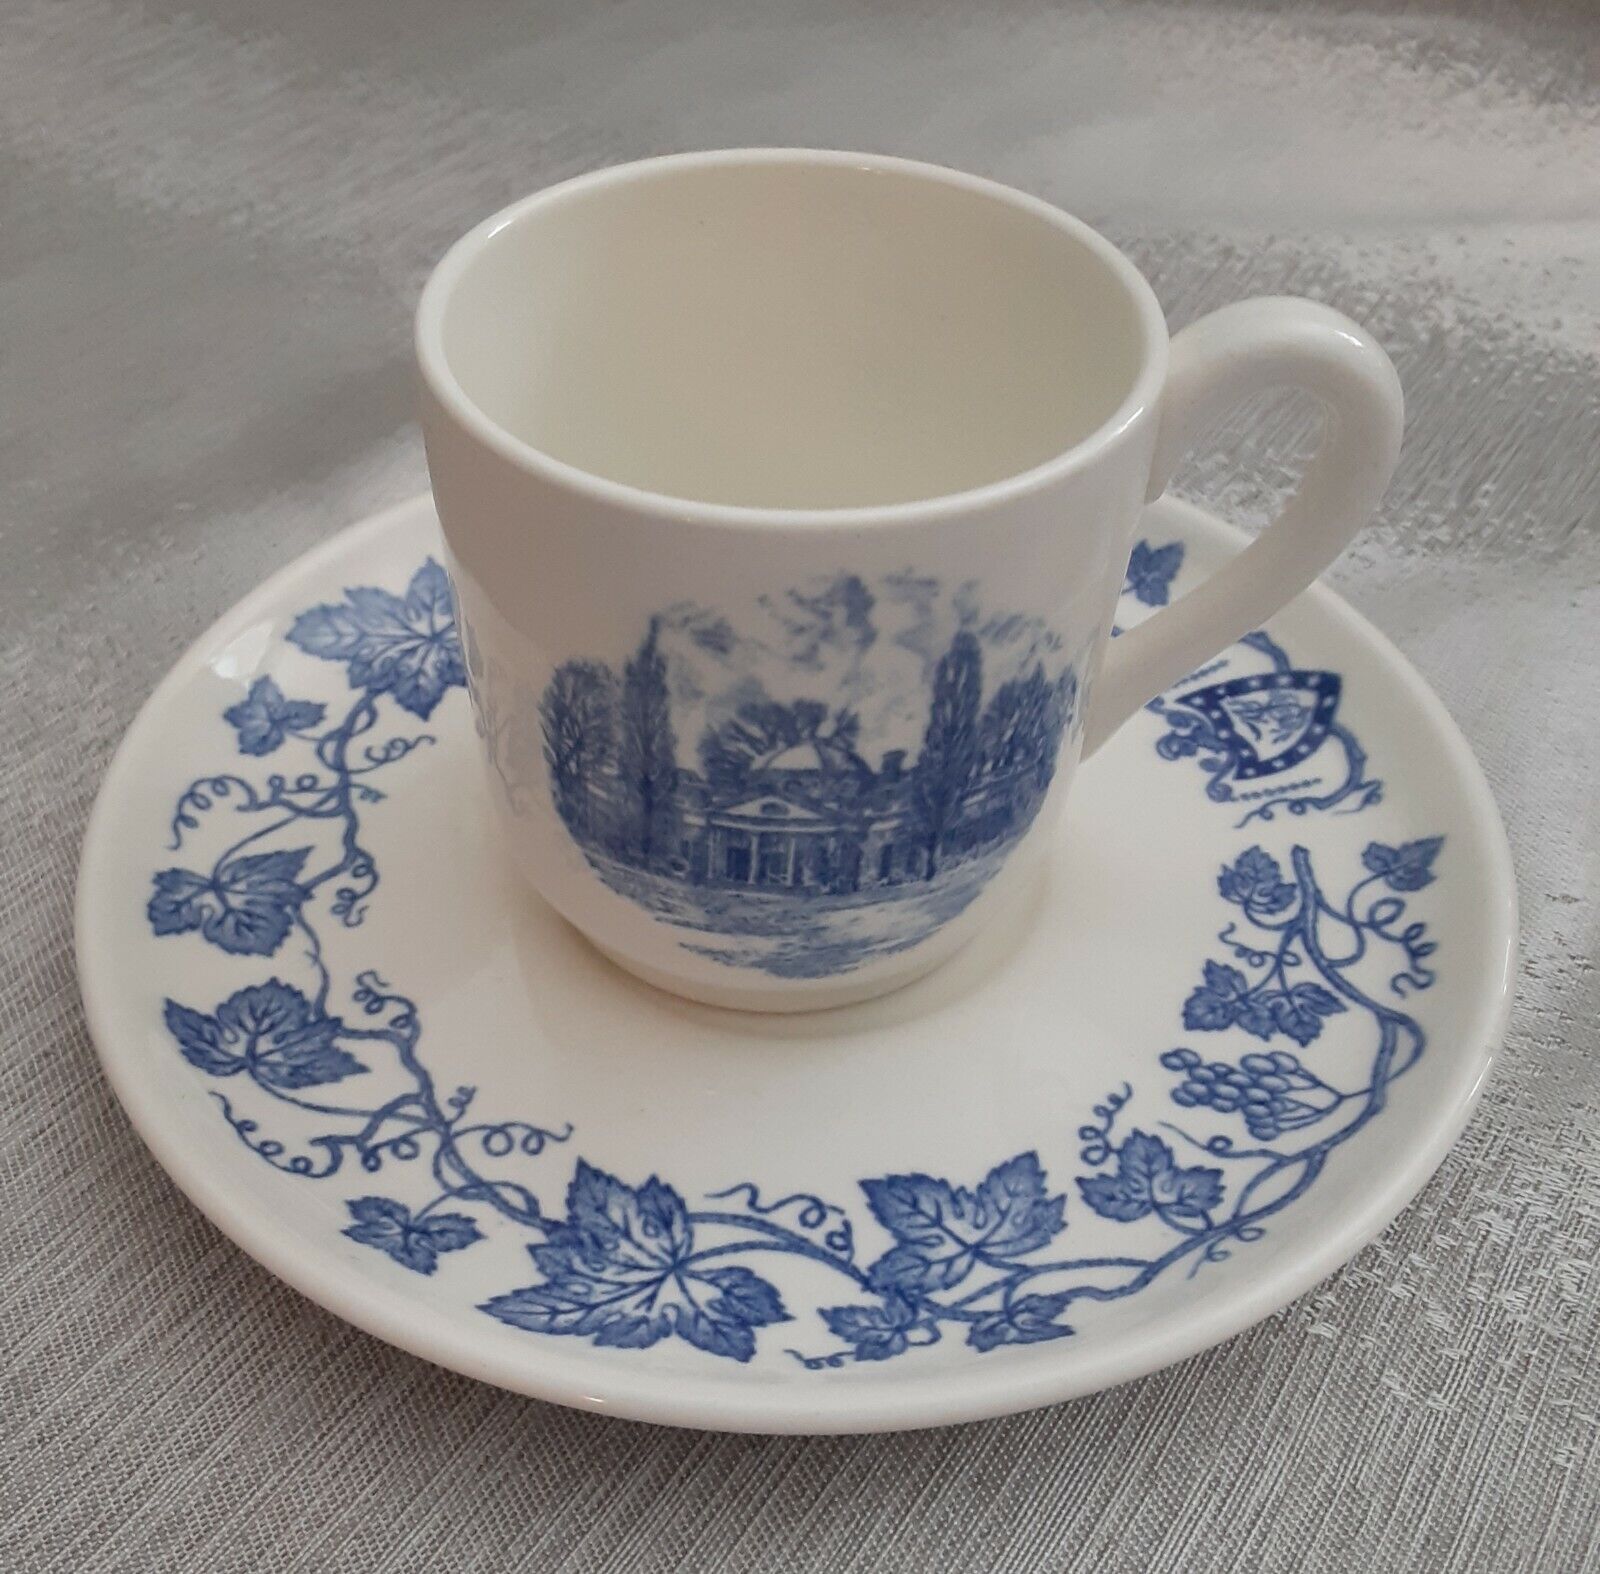 Wedgwood Monticello Demitasse Cup And Saucer Home Of Thomas Jefferson